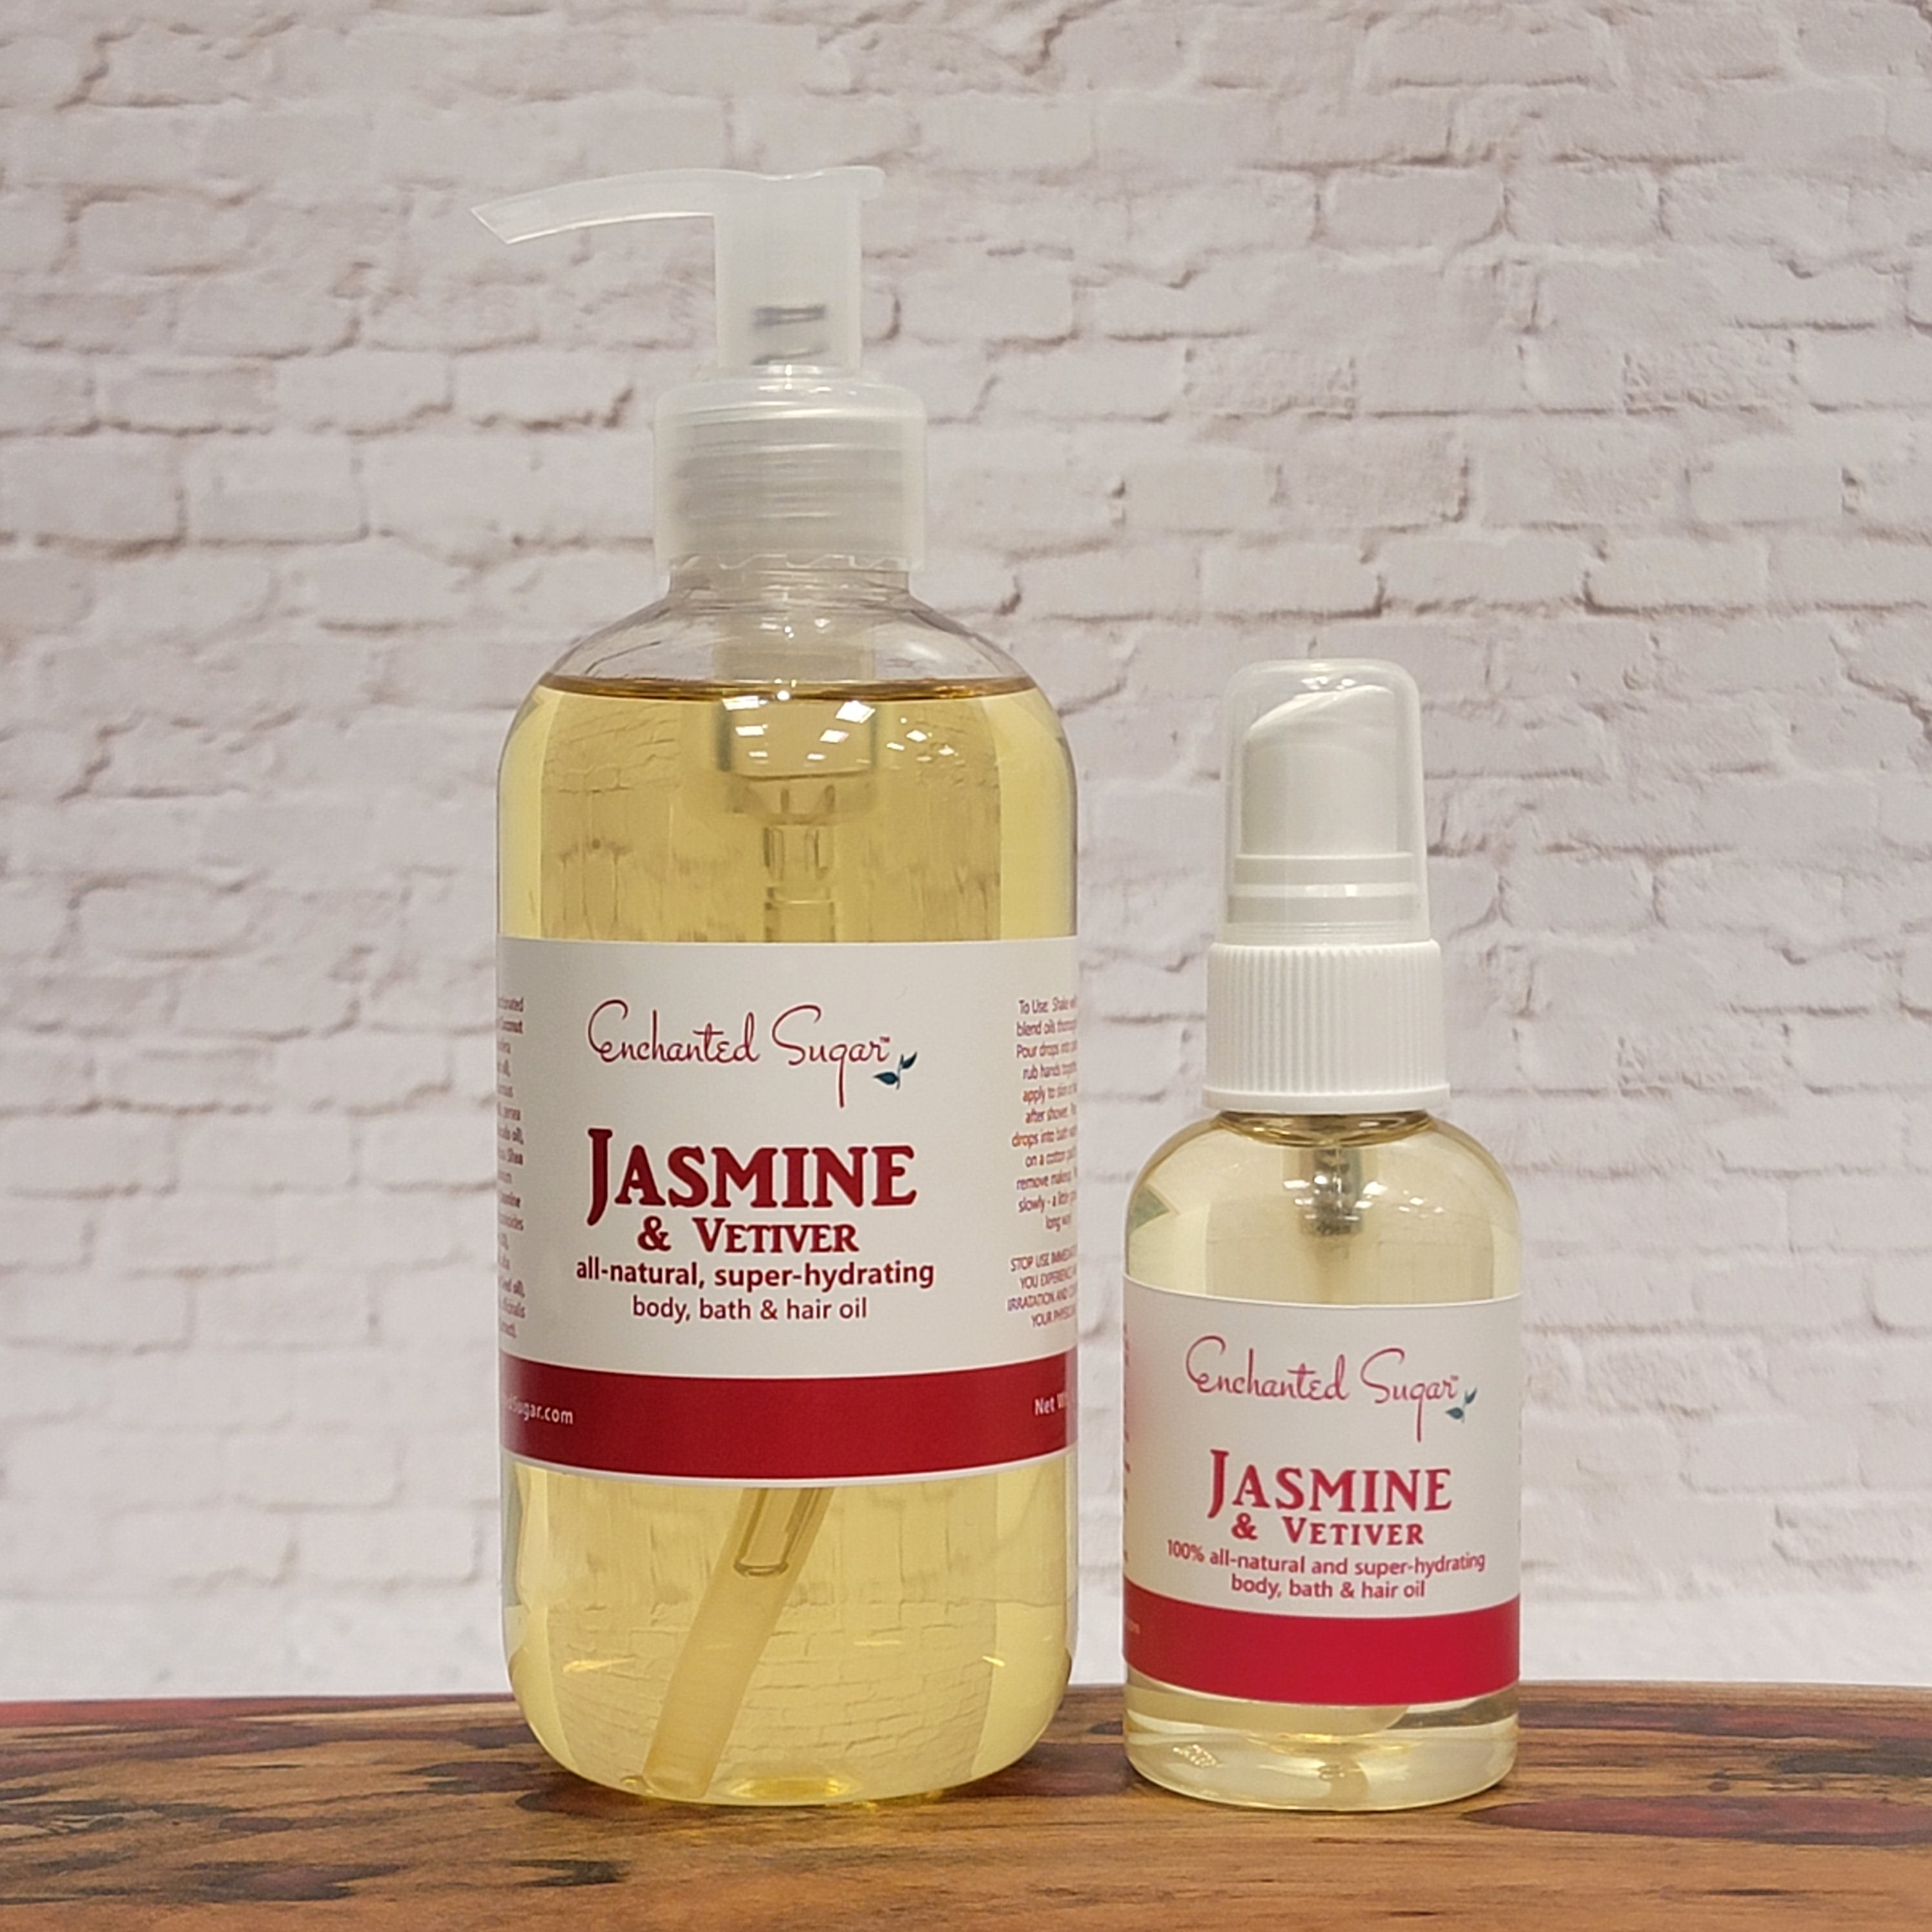 All About Jasmine Oil